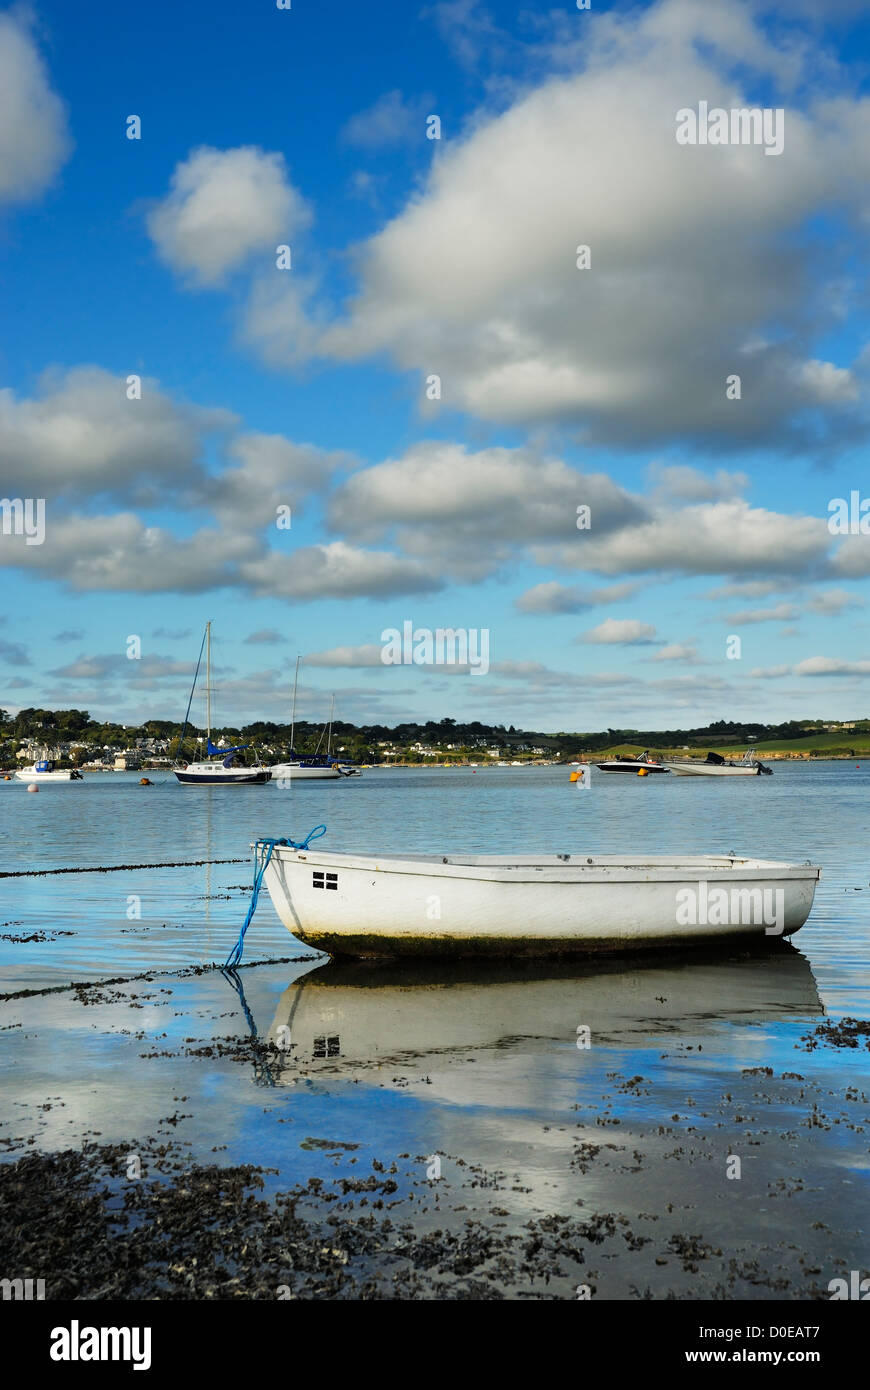 One boat with Cornish flag. Padstow, view to Rock mariner. Stock Photo